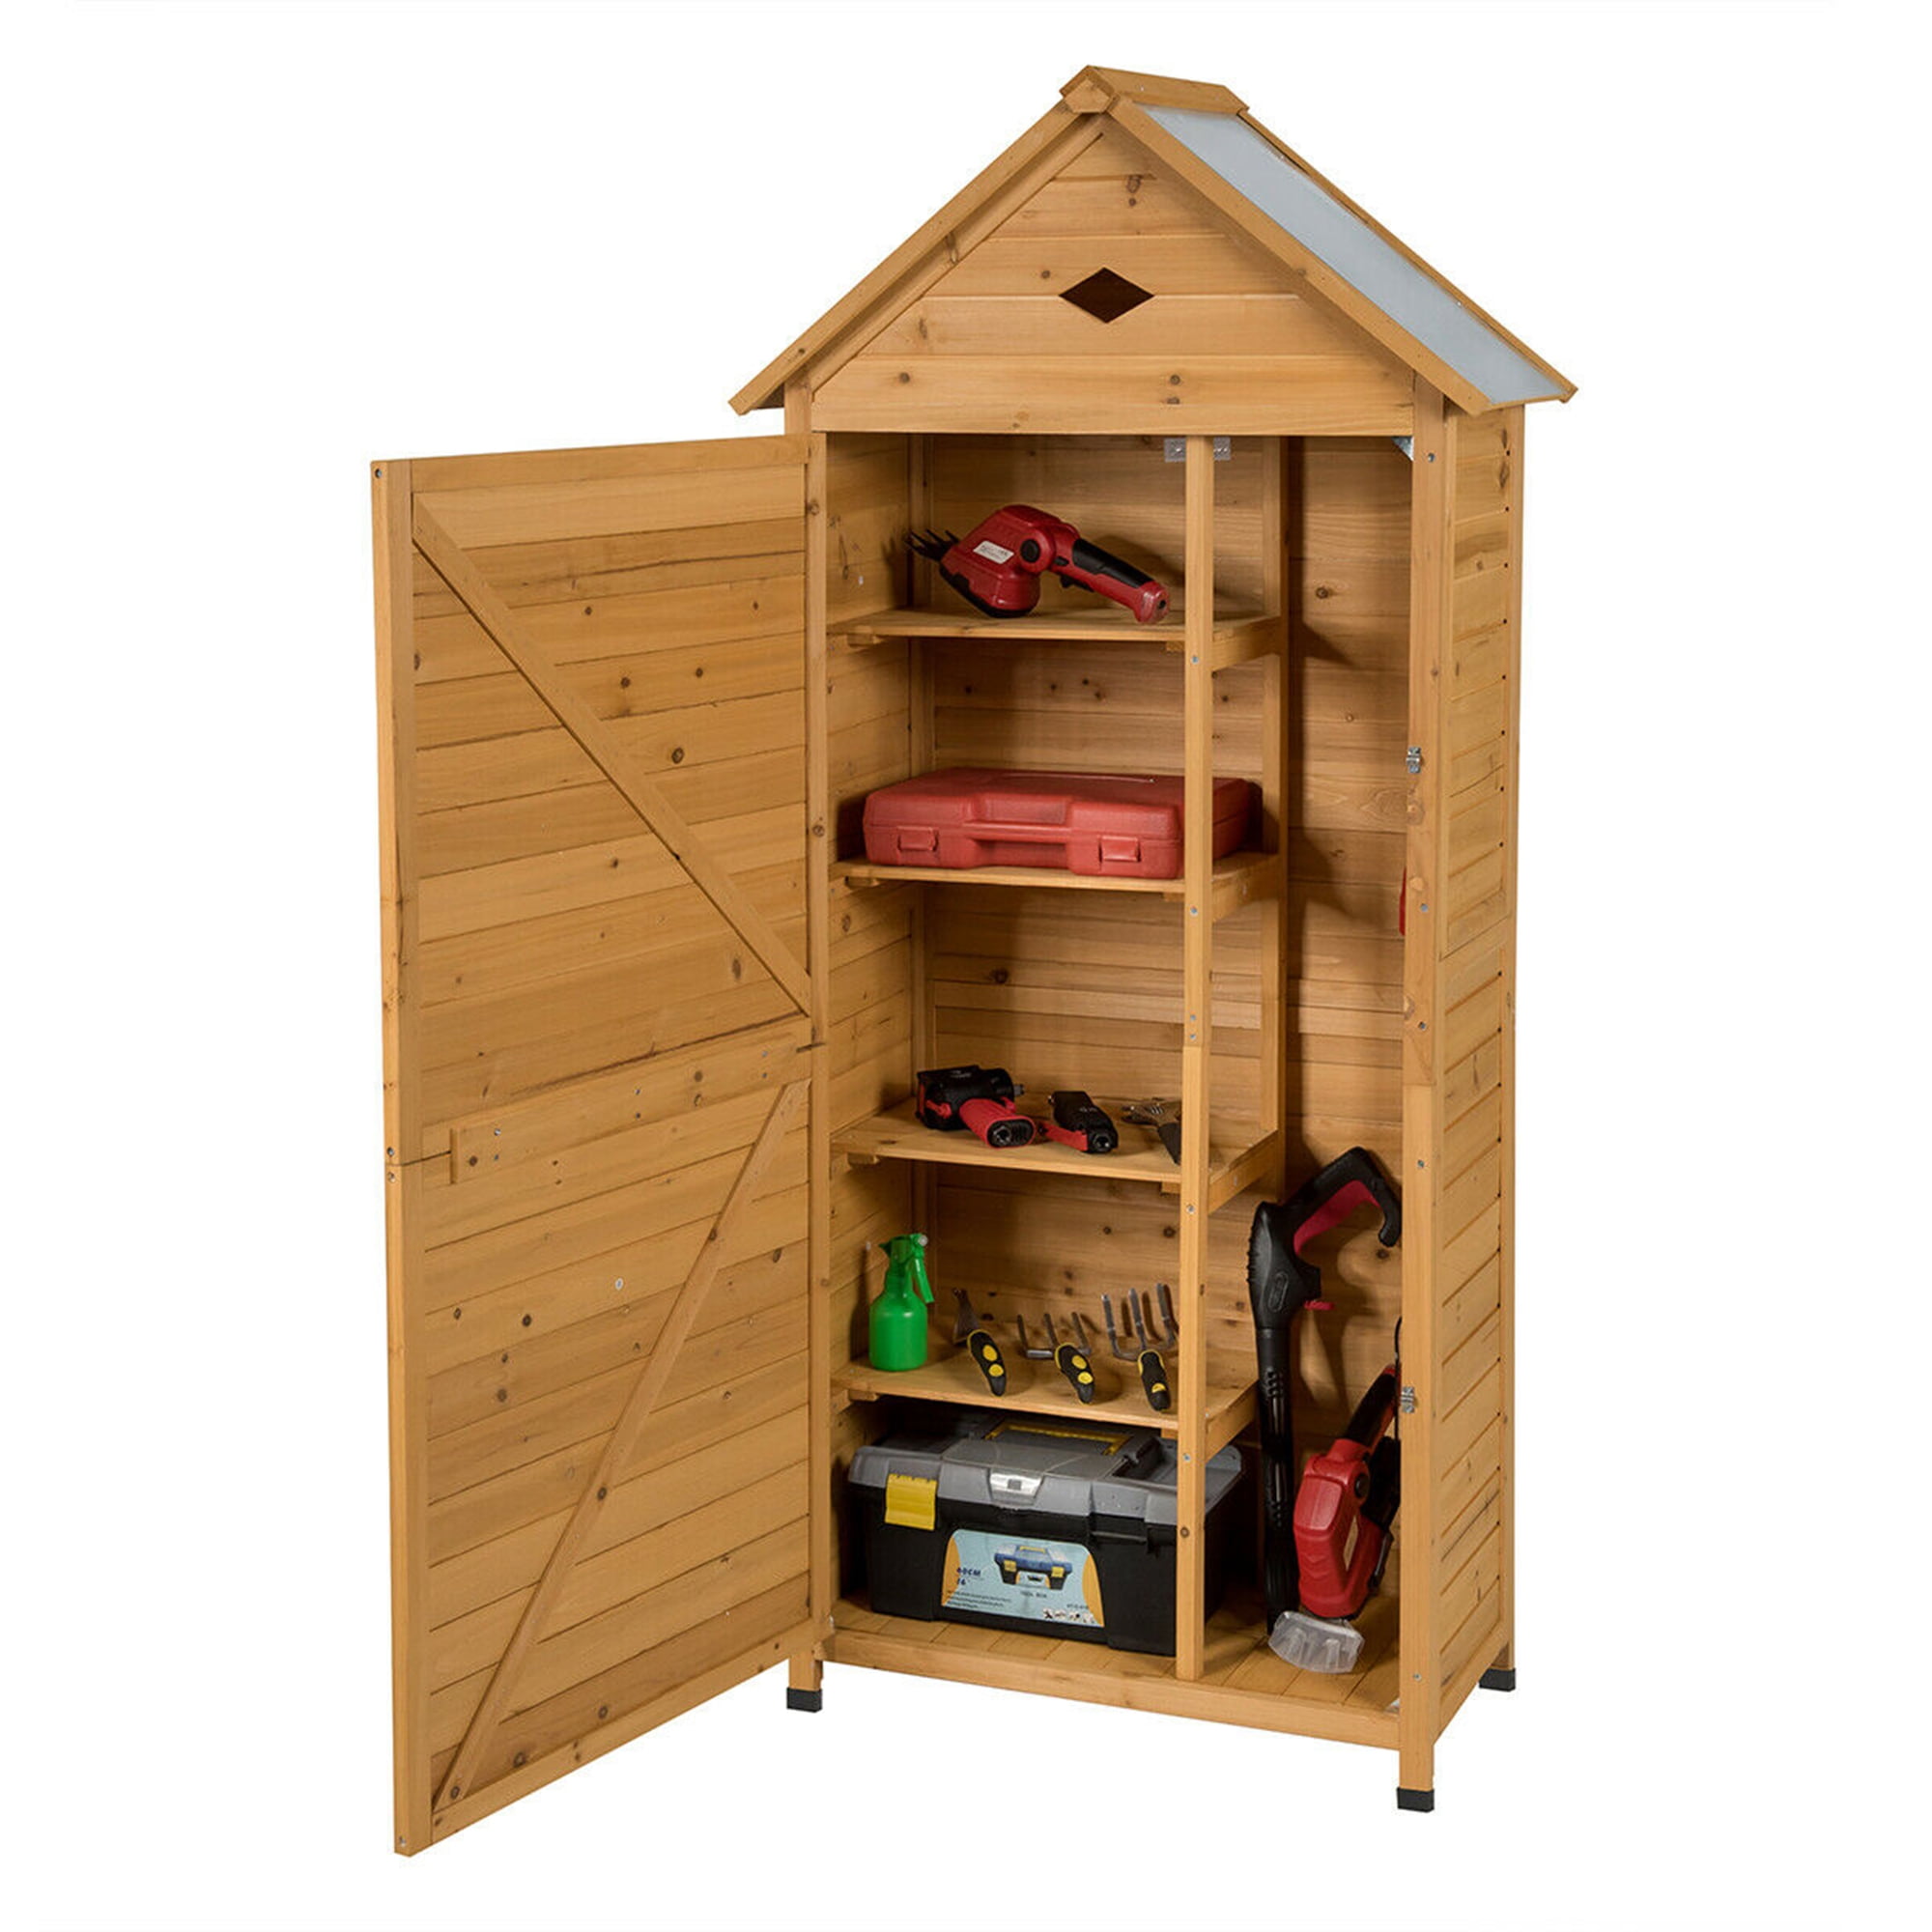 Gymax Outdoor Storage Shed Lockable, Outdoor Storage Shelf With Doors